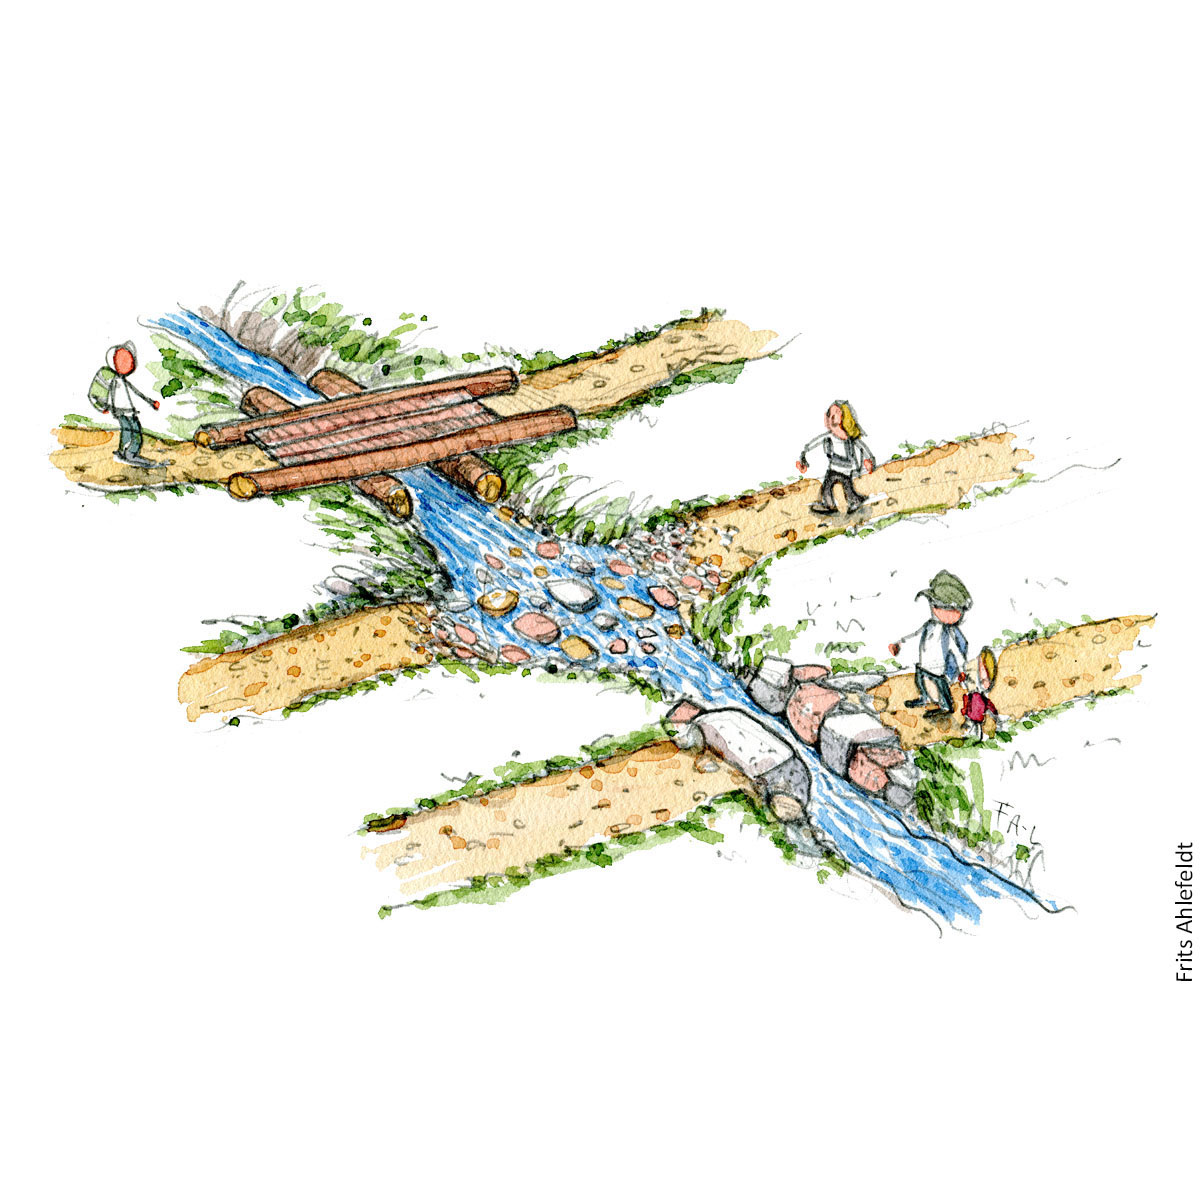 Stream with three different crossings: Drawing by Frits Ahlefeldt. Hiking.org